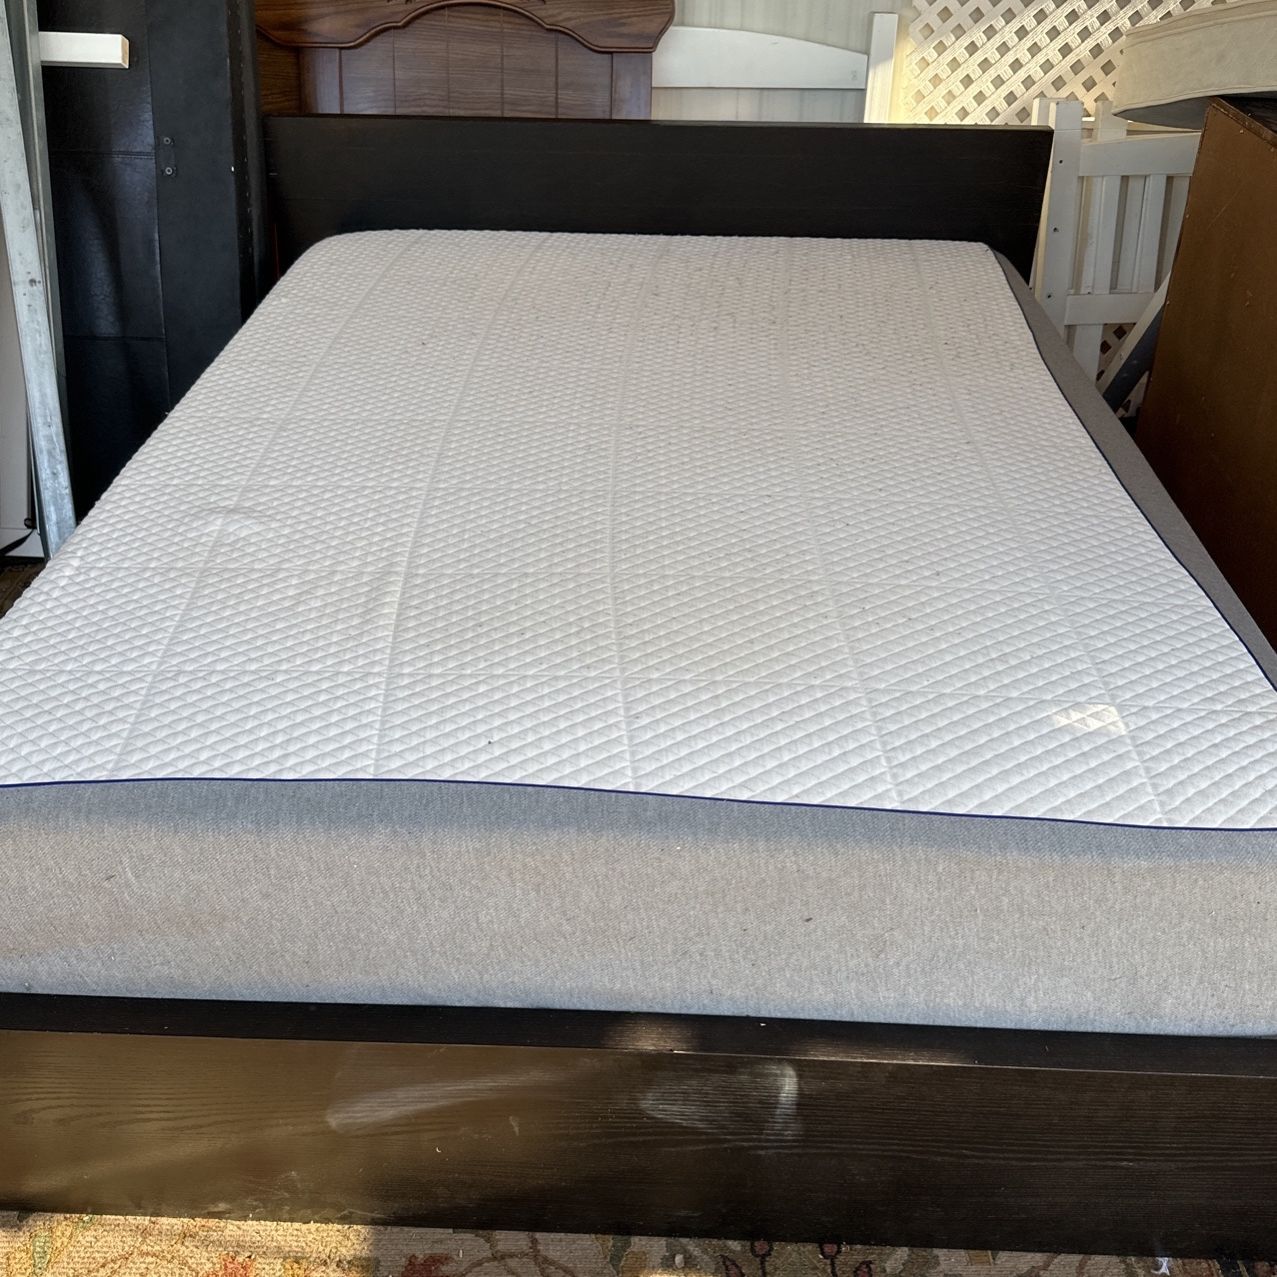 IKEA, MALM queen size bed with nectar, memory foam mattress